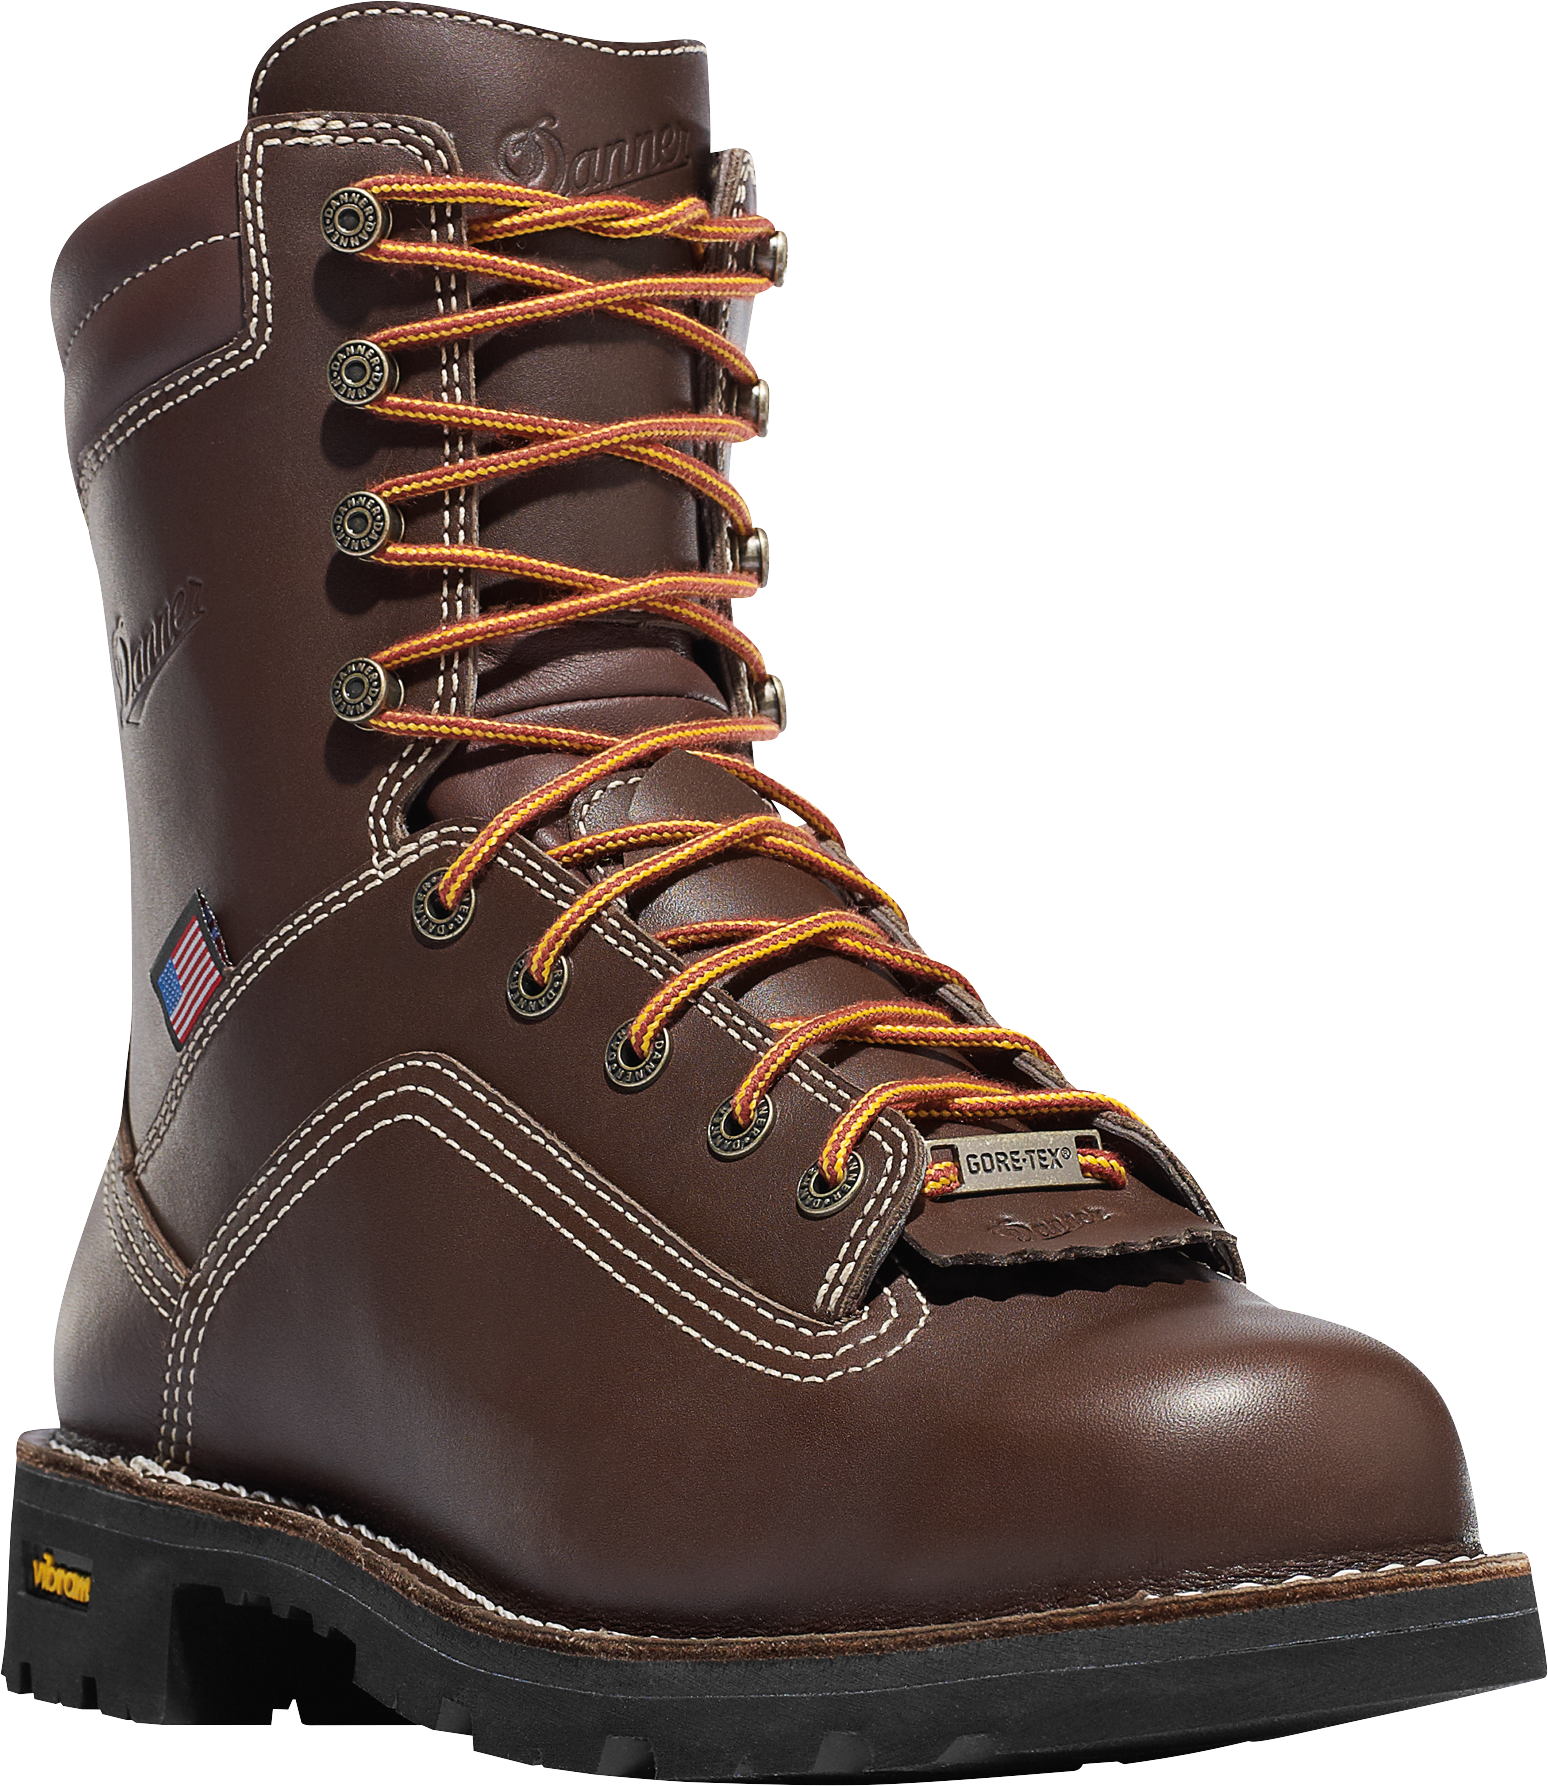 Danner Quarry USA Brown GORE-TEX Alloy Toe Work Boots for Men - Brown - 7.5W